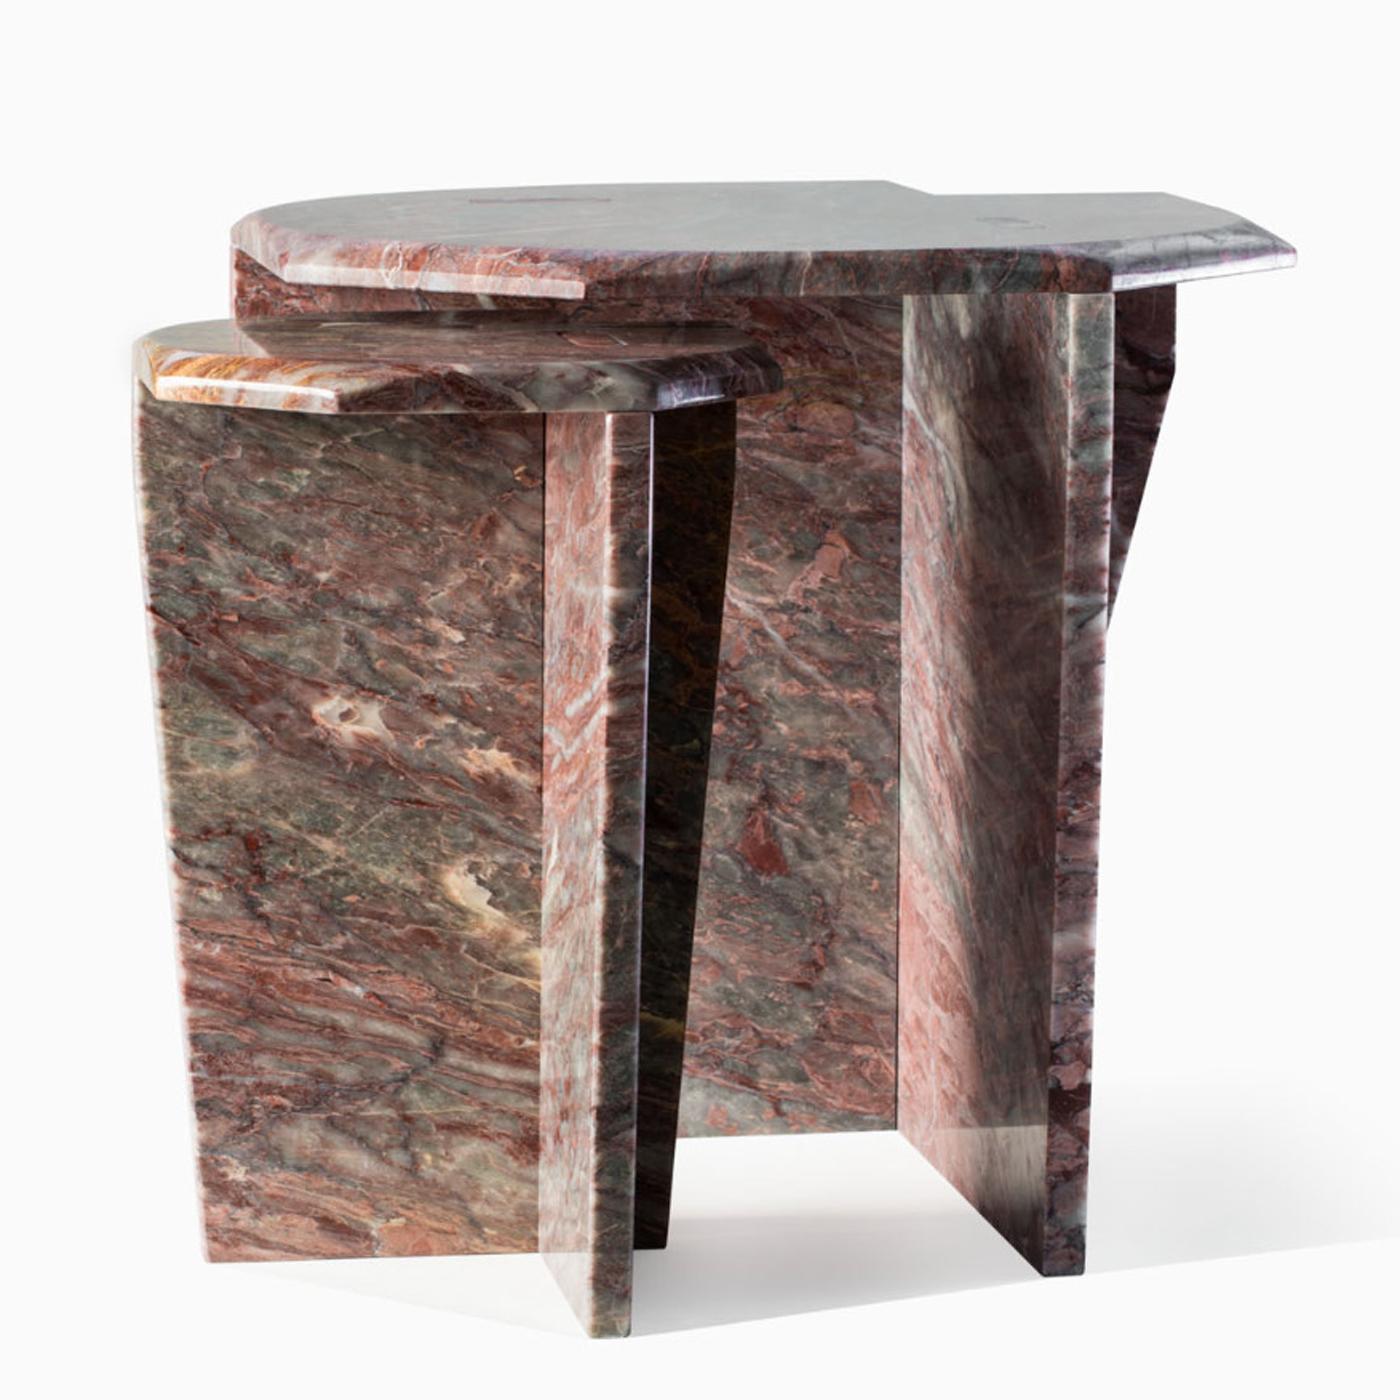 This elegant Salomé marble coffee table features one central support. The Z series uses joints and no glue or screws. The combinations can be customized with two different kinds of marble for top and bottom among the following: green Guatemala,